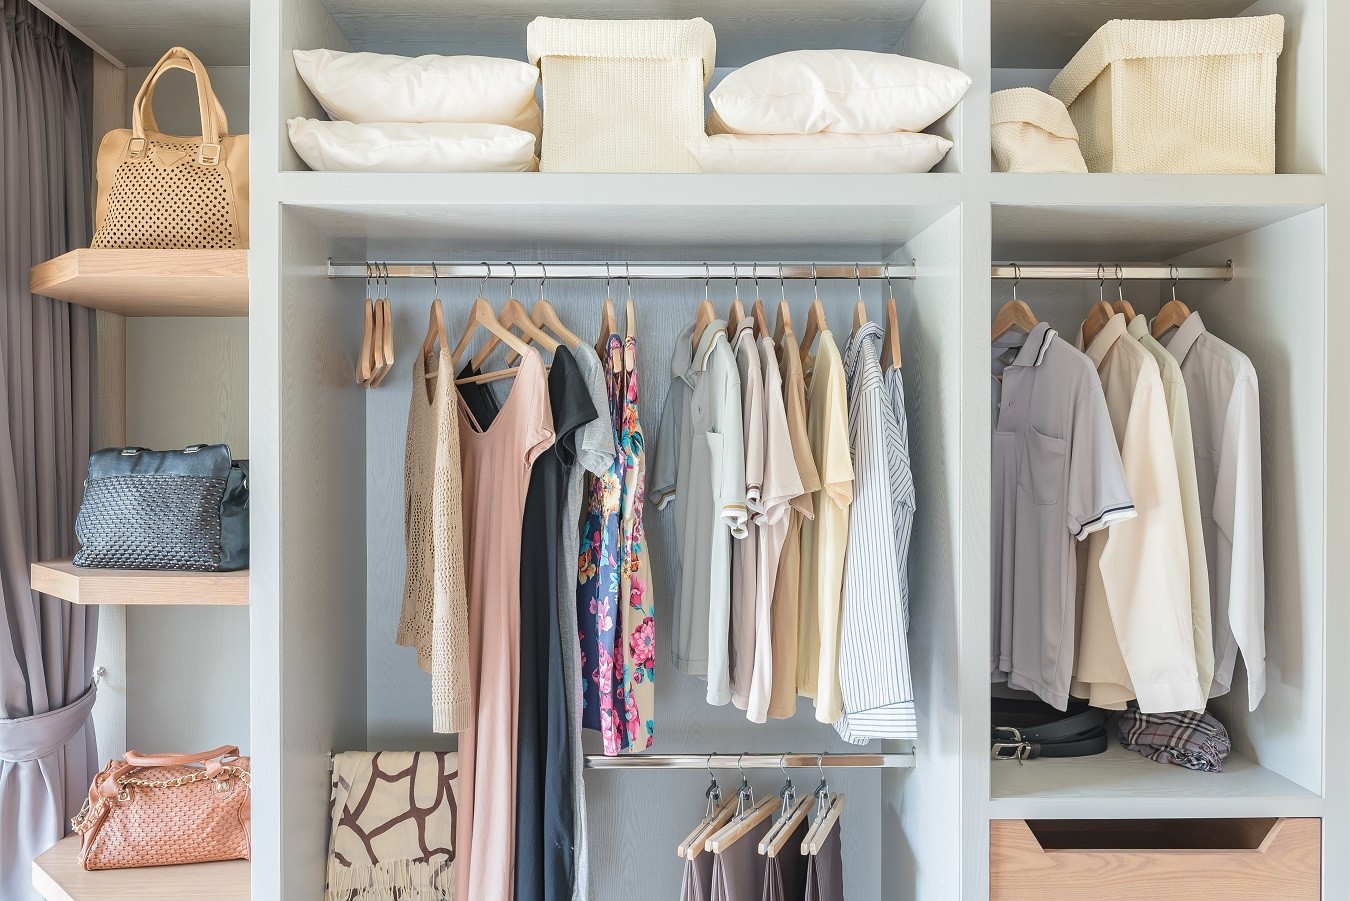 Ask us about our interior organisation and Styling services - Your experts in decluttering services & wardrobe organisation